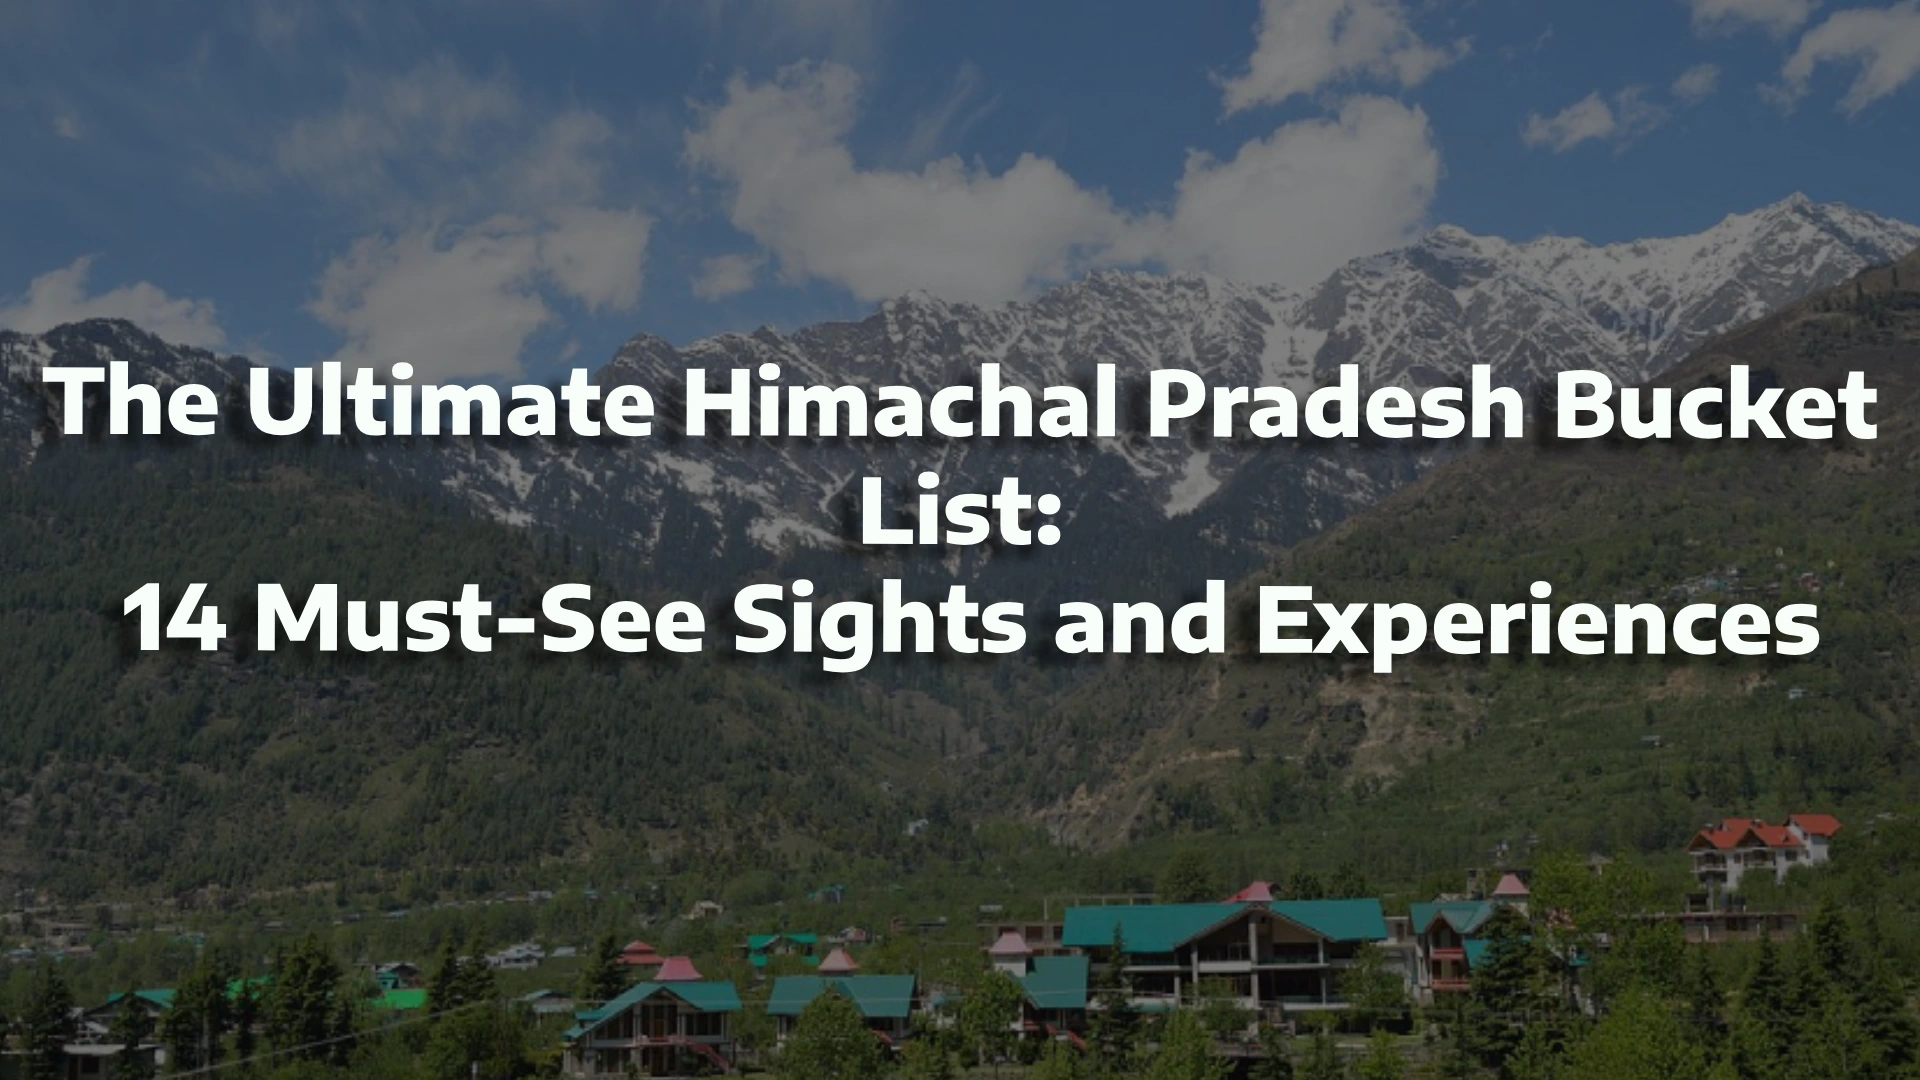 The Ultimate Himachal Pradesh Bucket List: 14 Must-See Sights and Experiences